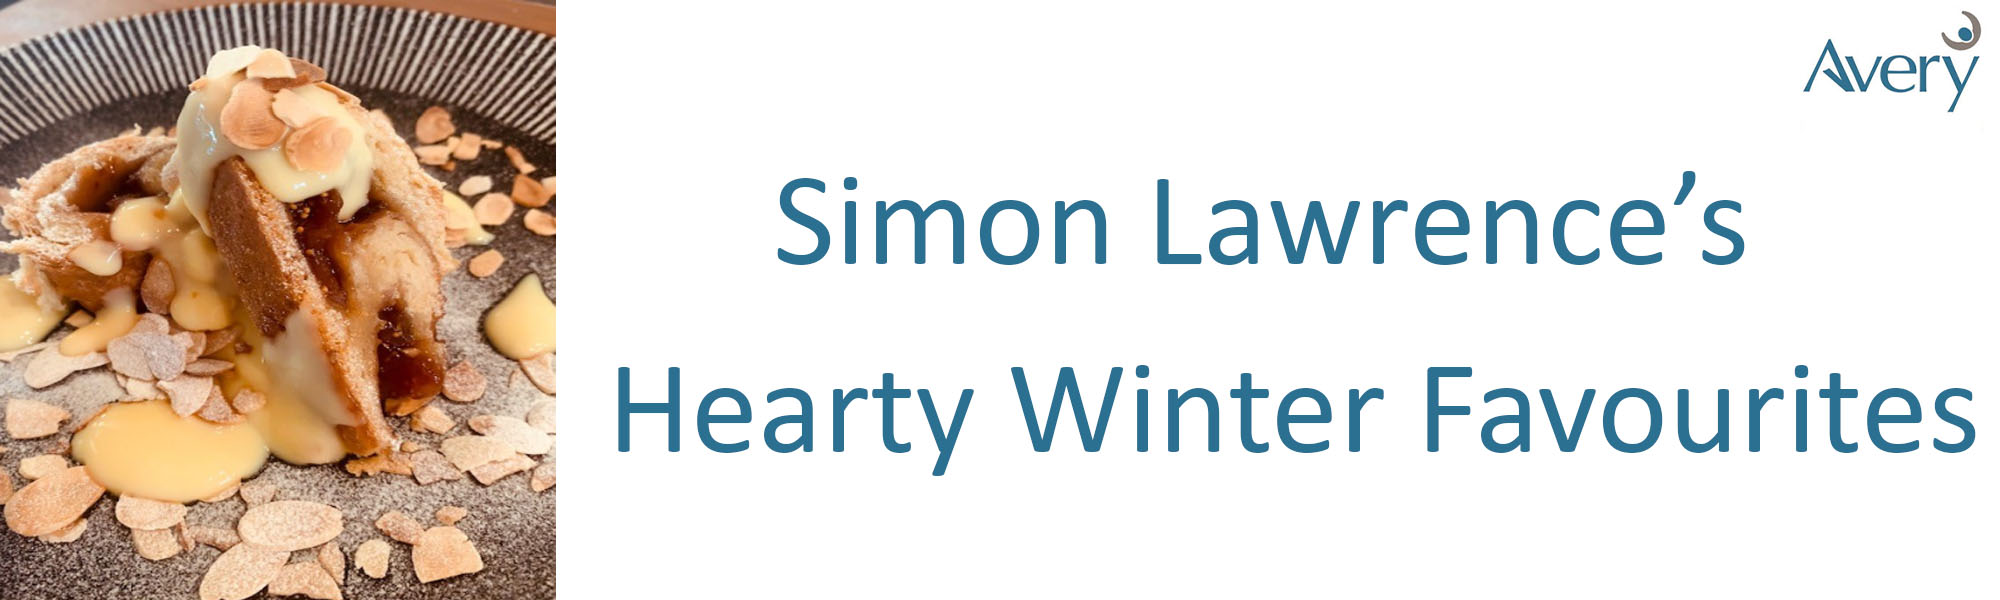 Simon Lawrence's Hearty Winter Favourites Banner